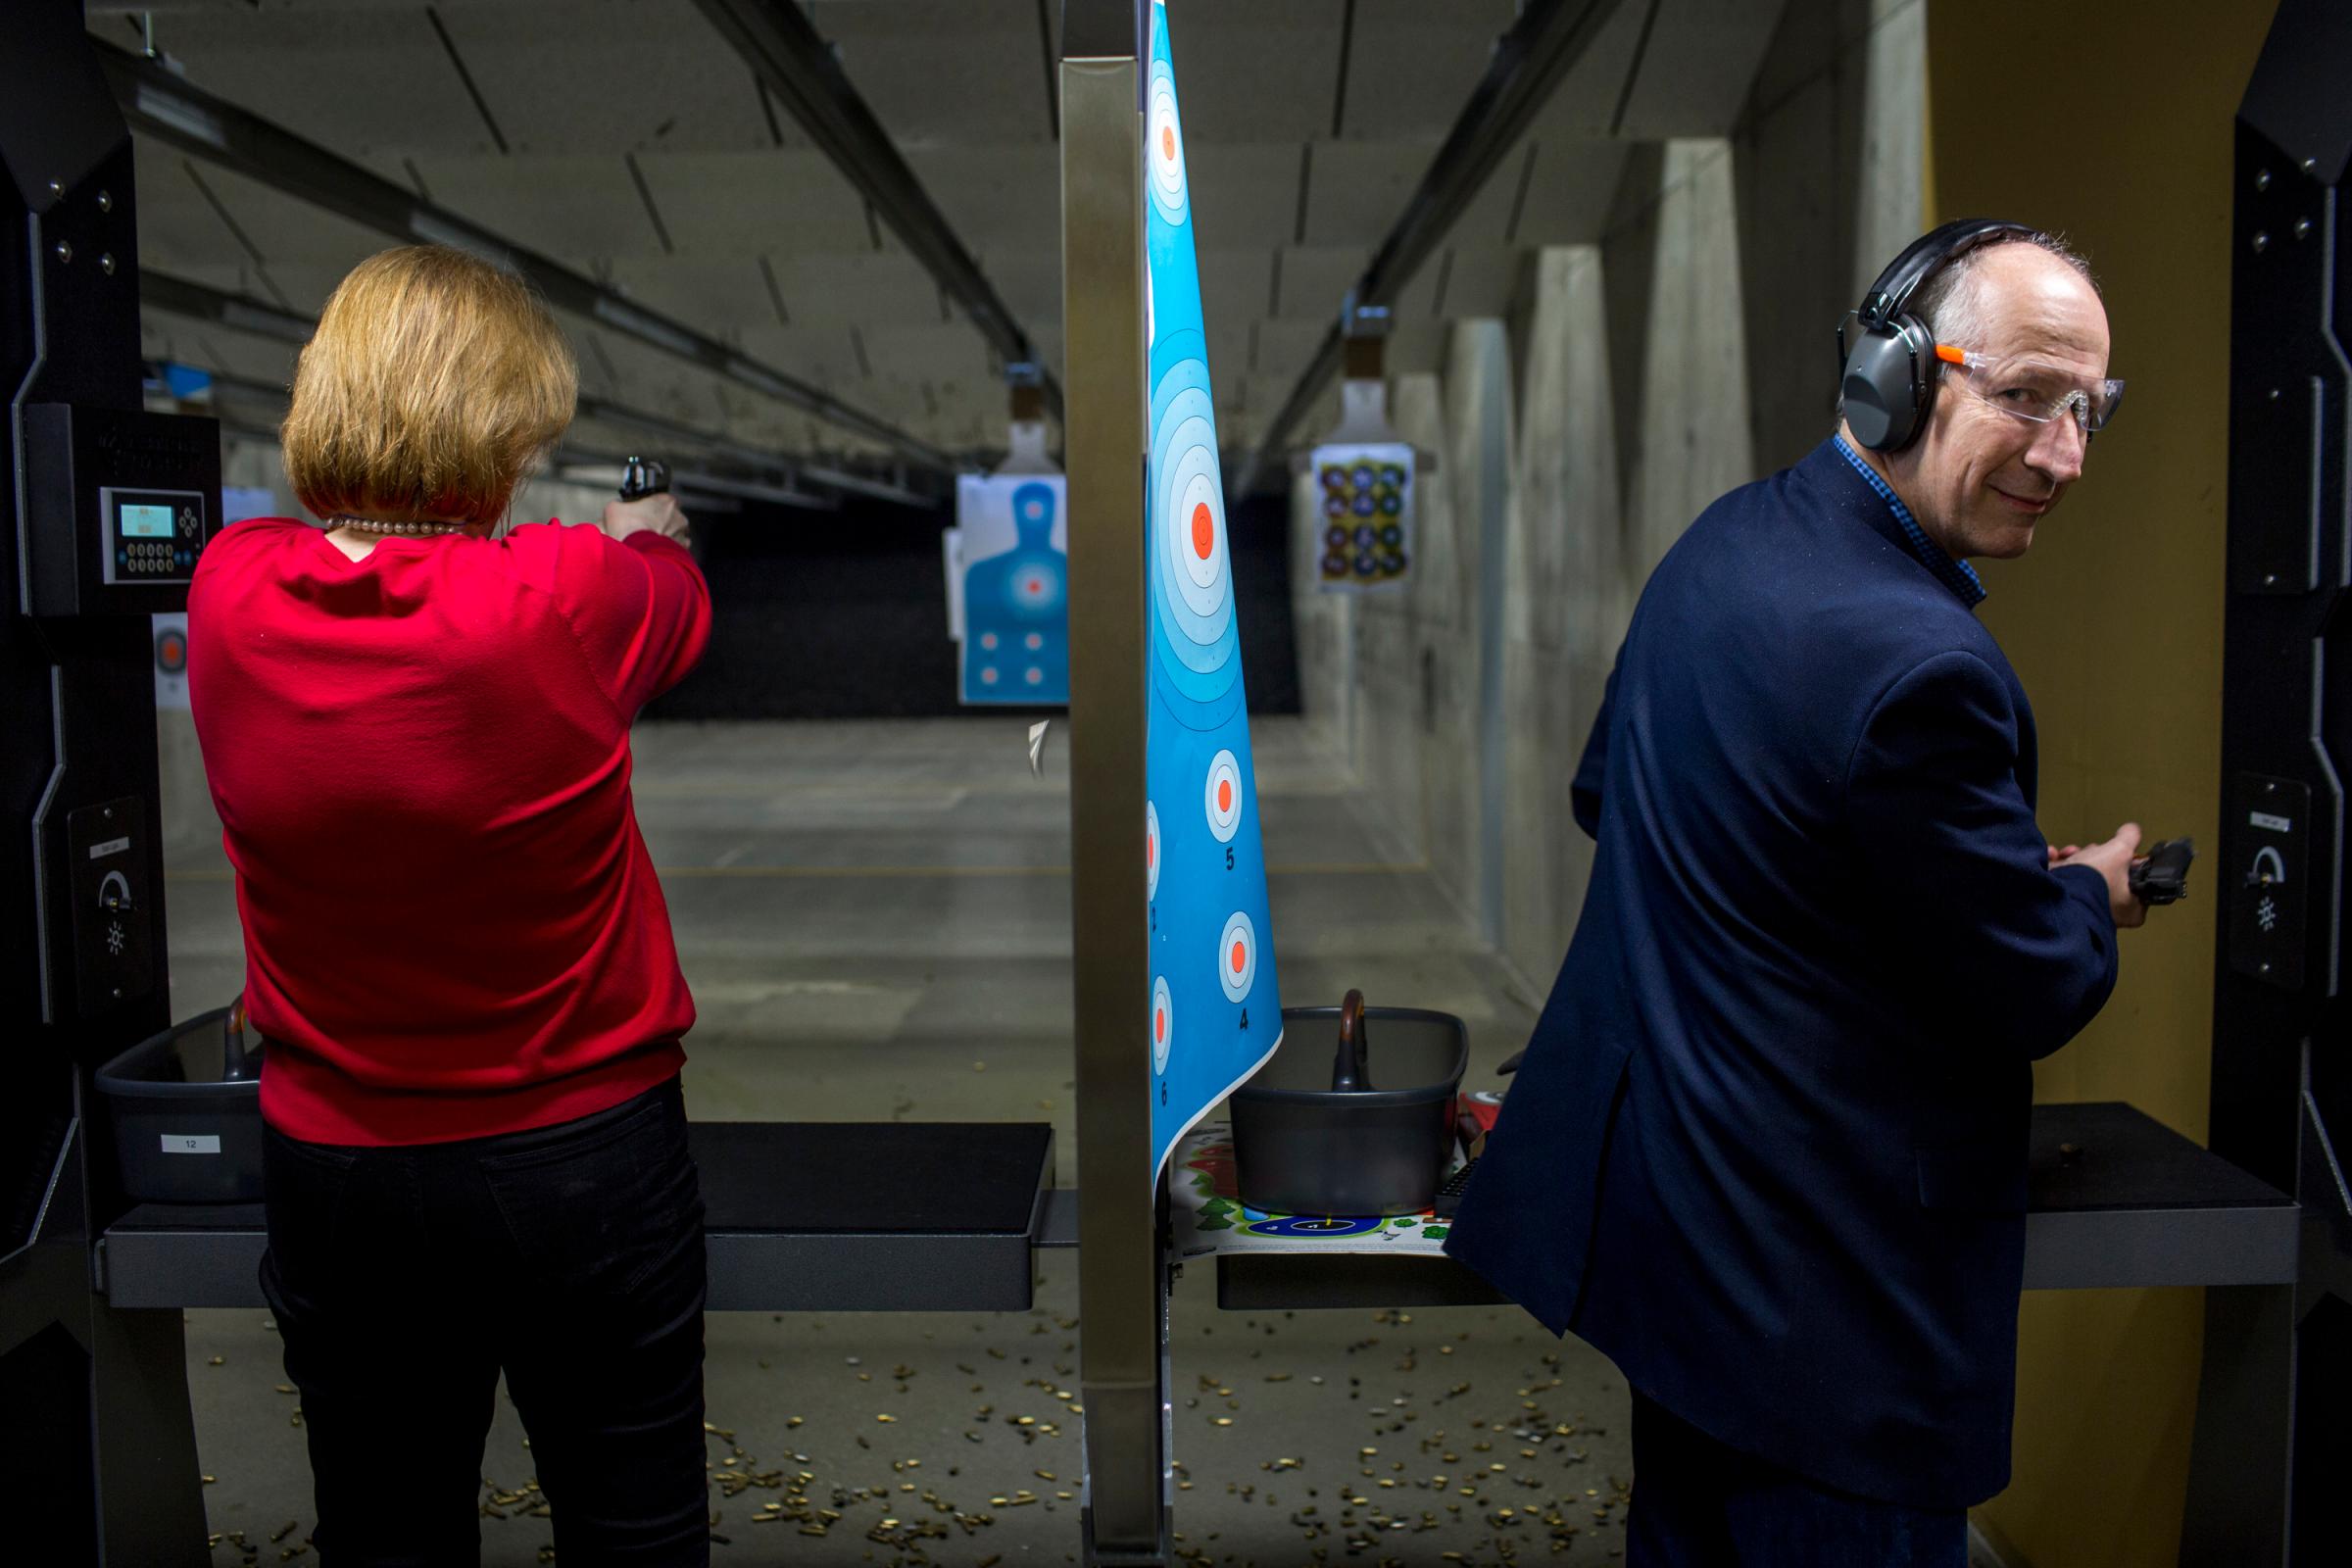 Former Arkansas Gov. Mike Huckabee and his wife Janet campaign at the Crossroads shooting range in Johnston, Iowa on Jan. 30, 2016.